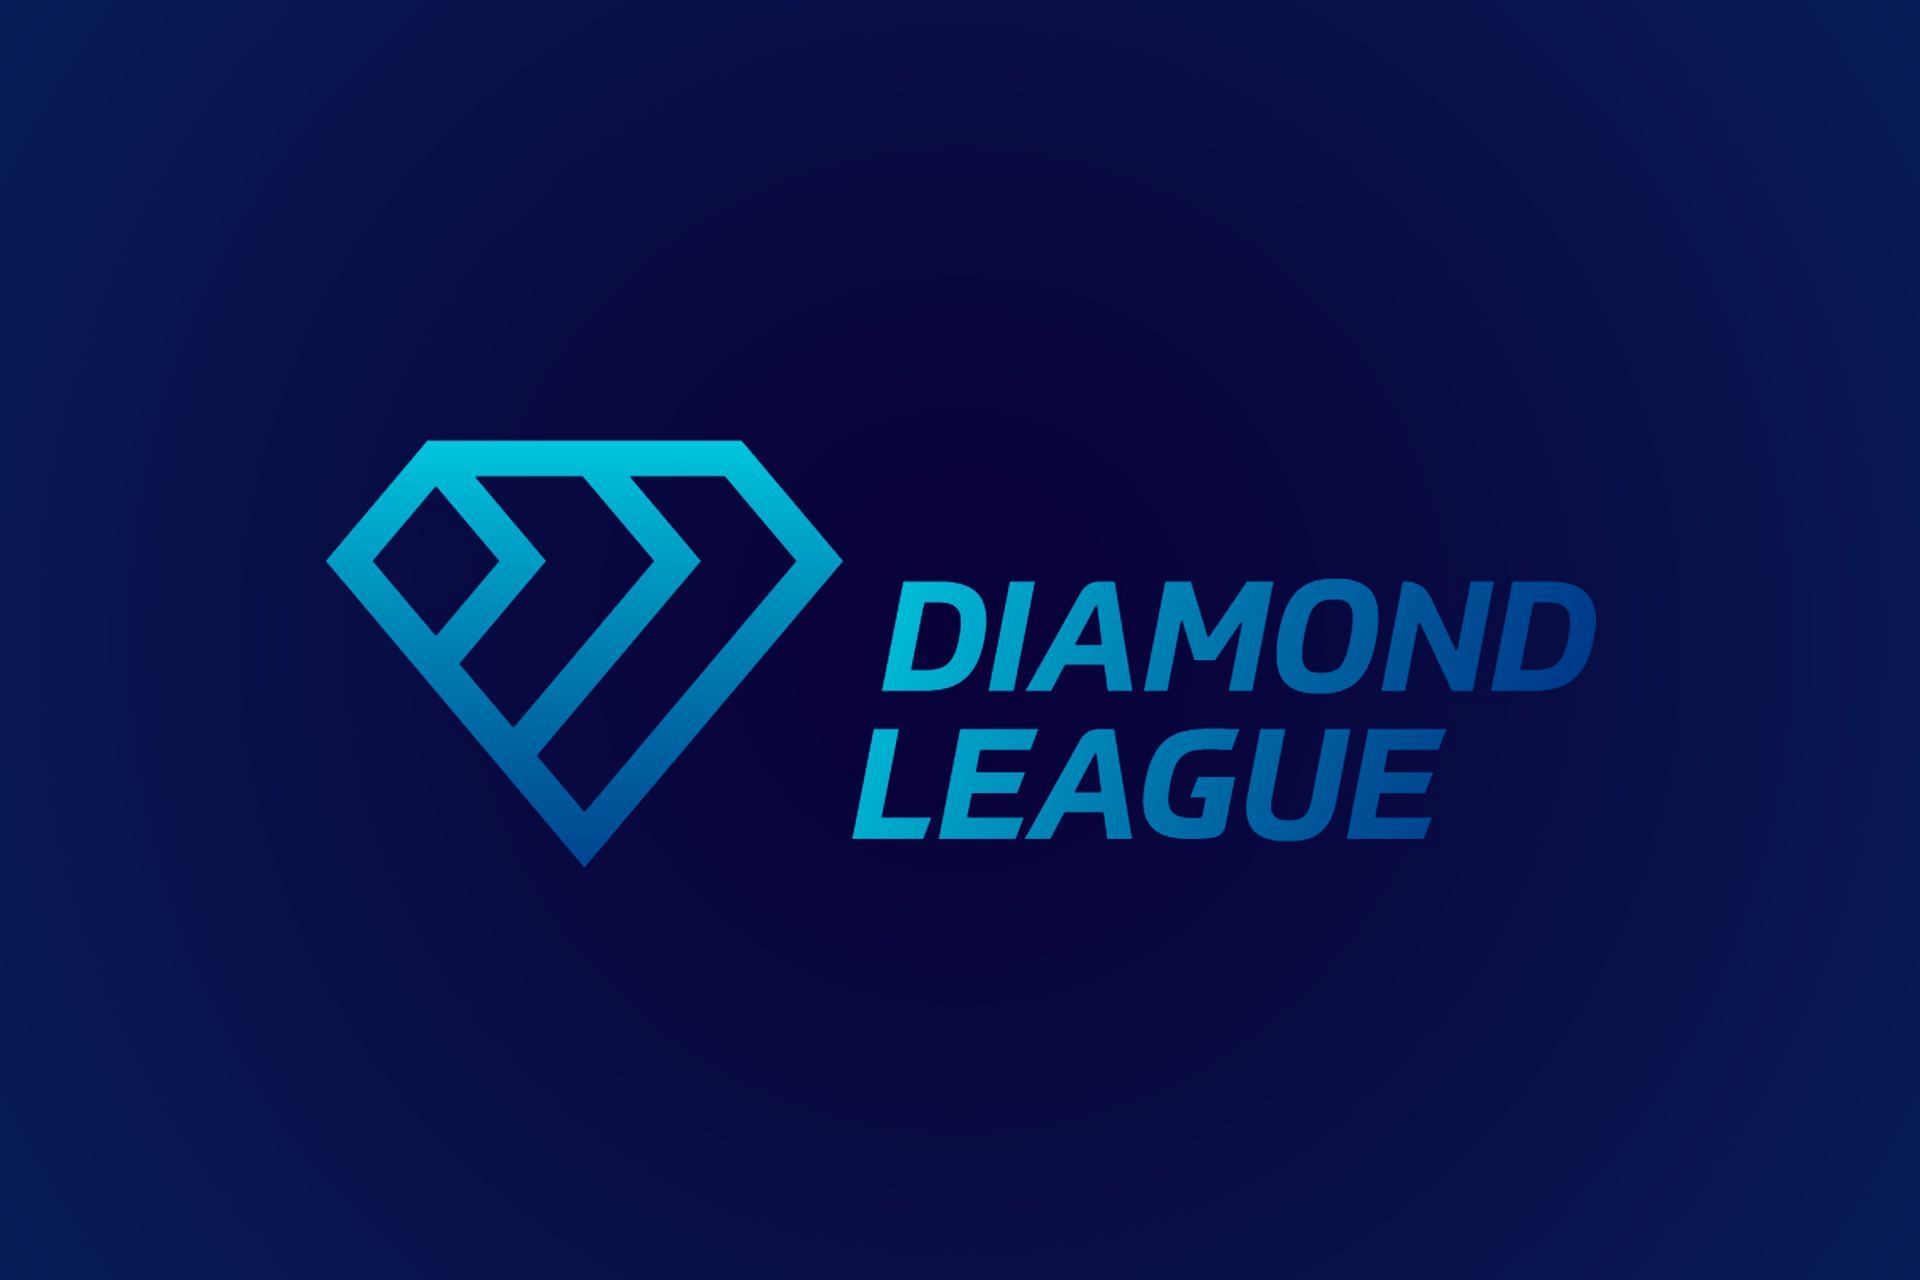 The Diamond League 2022 will be held in the second week of September 2022 (Image via Diamond League)